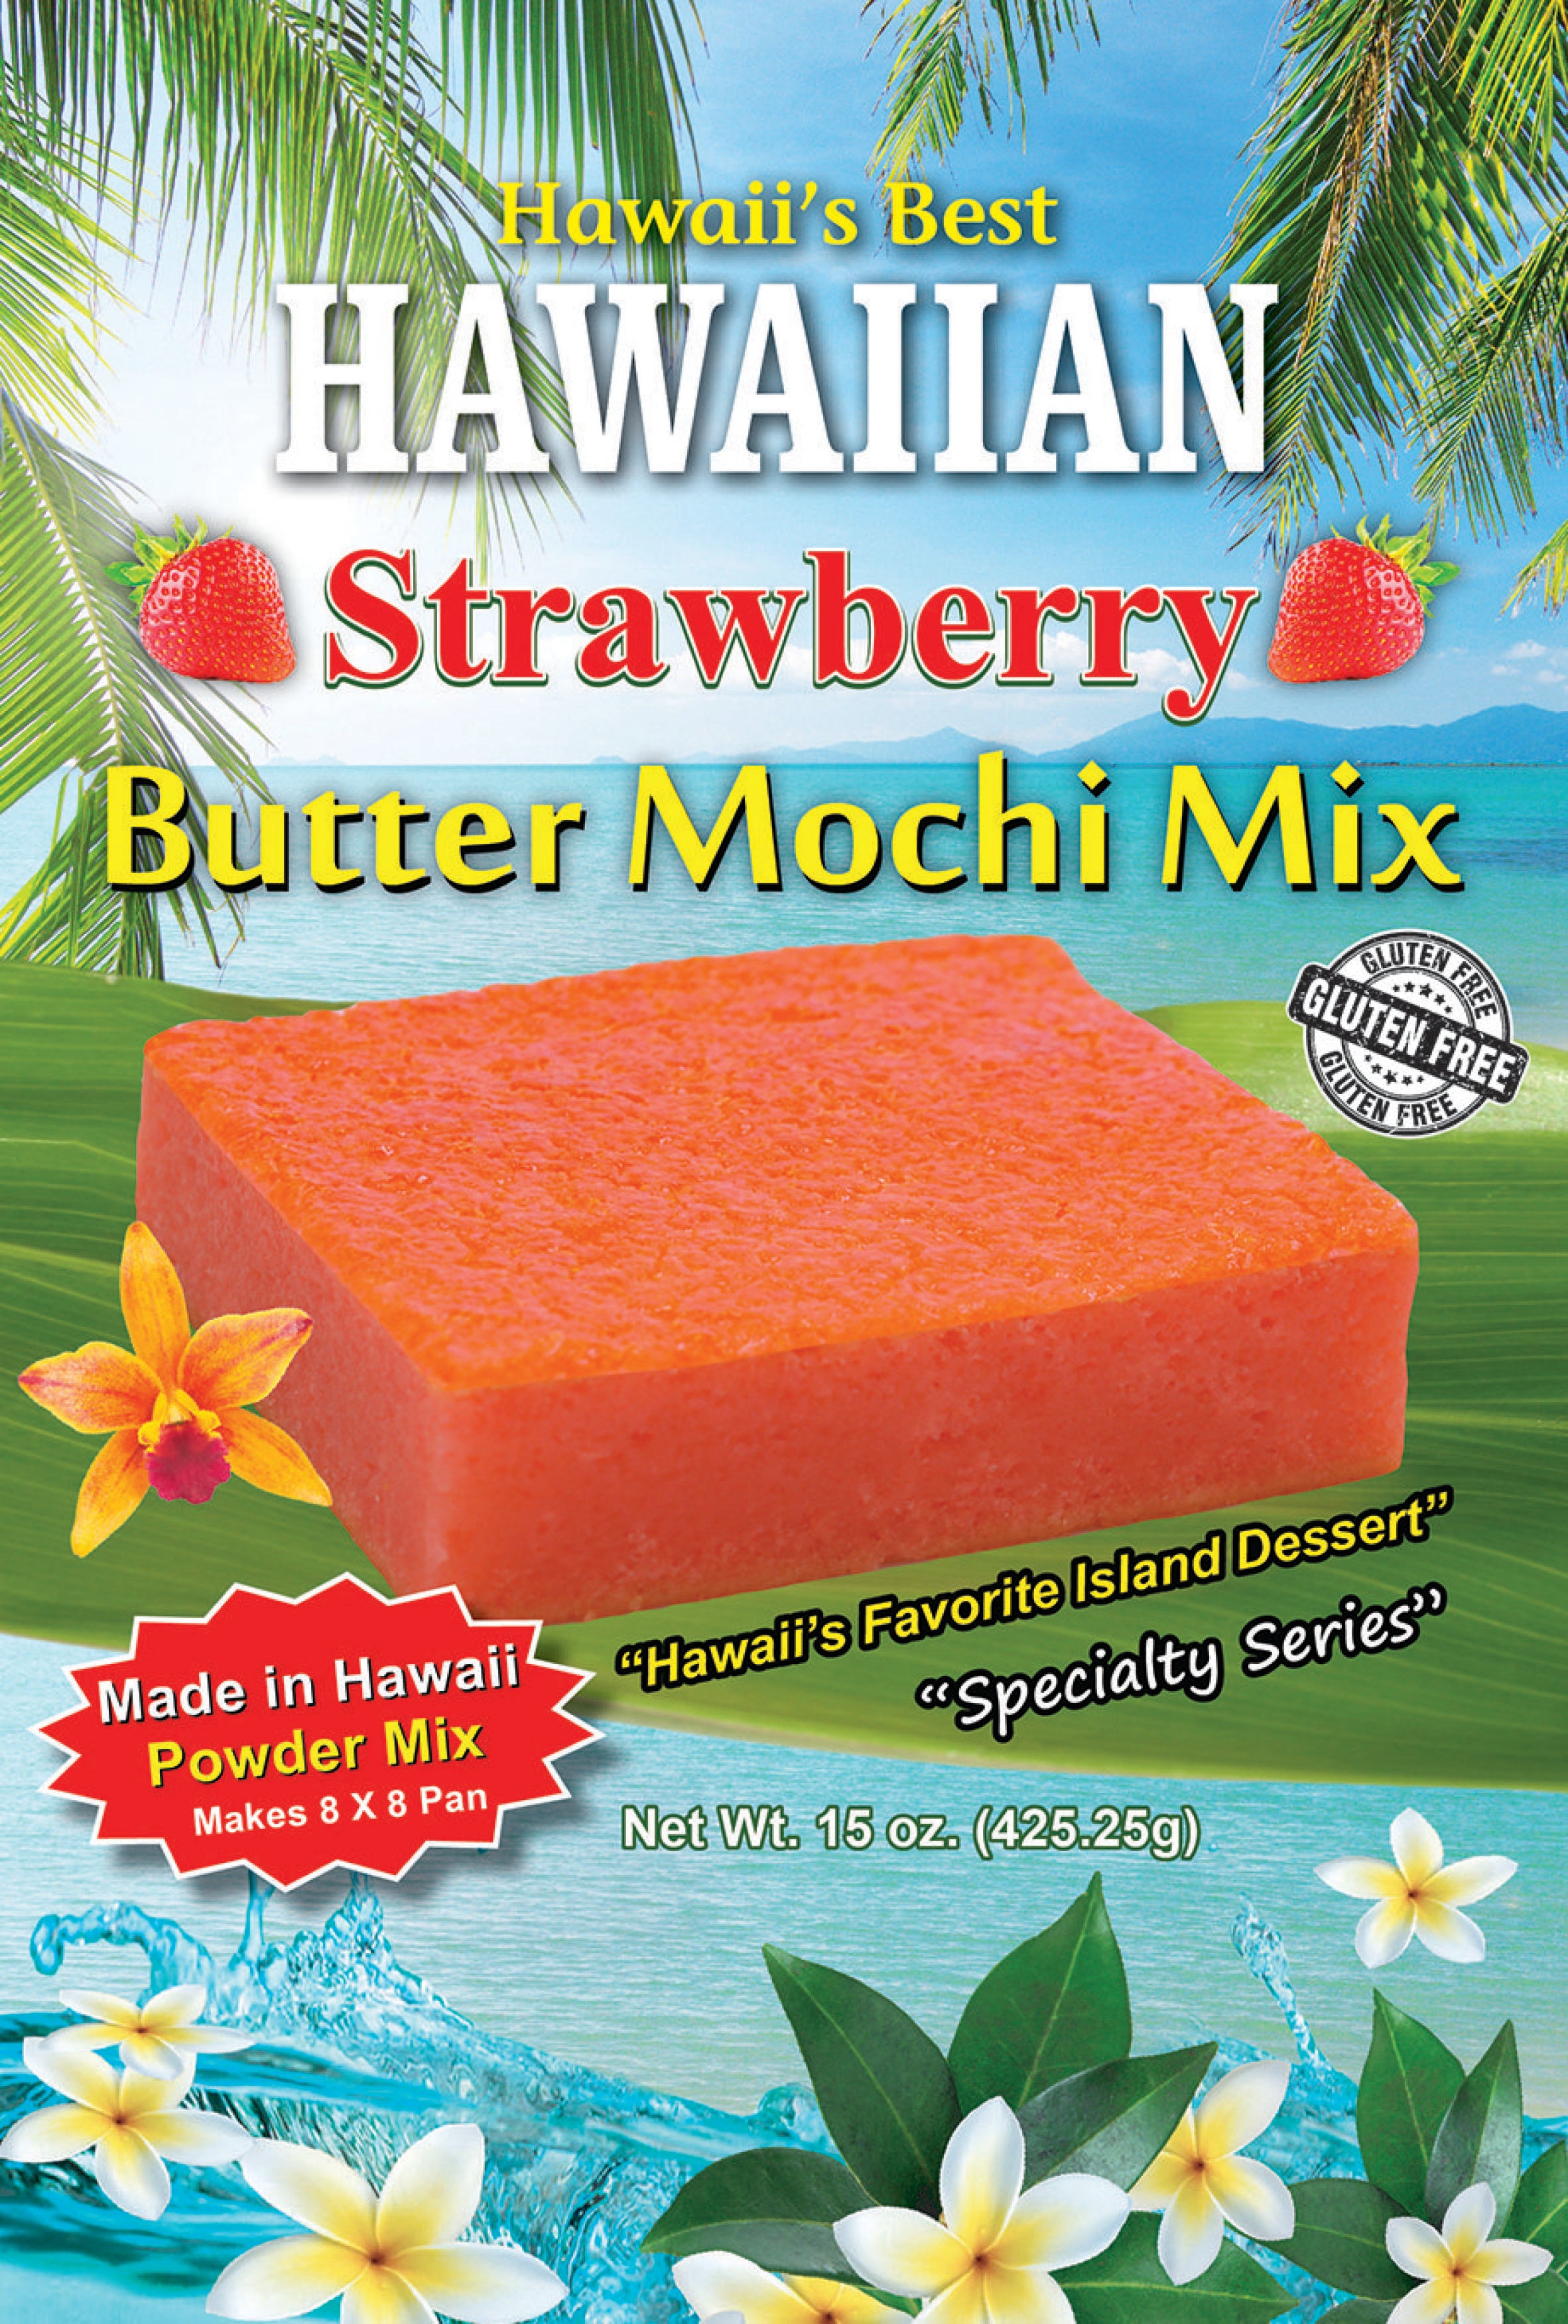 (1 BAG) STRAWBERRY BUTTER MOCHI MIX, Specialty Item, Makes 8x8 pan, Gluten Free!